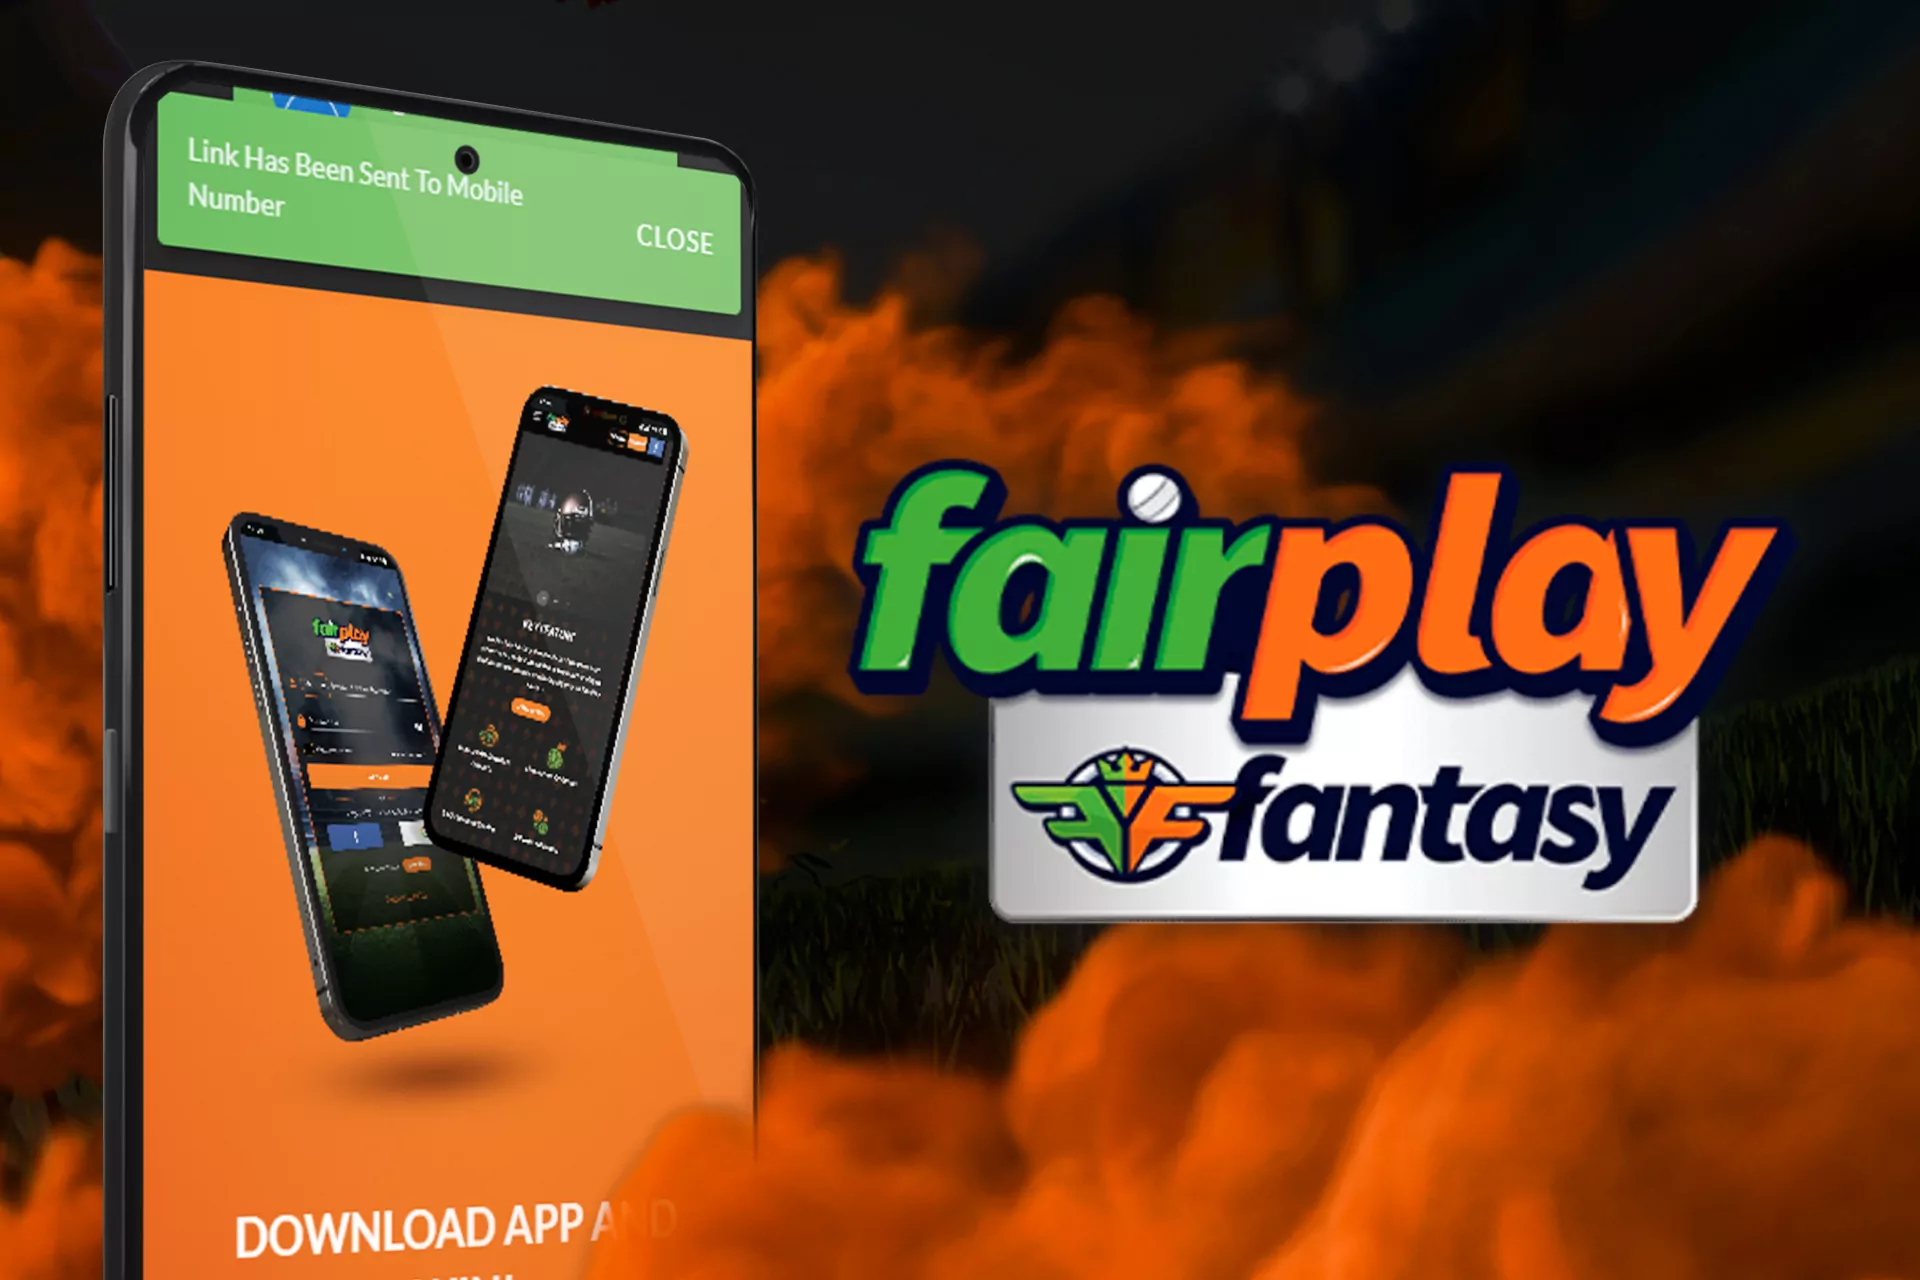 Download the apk file and run it to install the Fairplay Fantasy app.